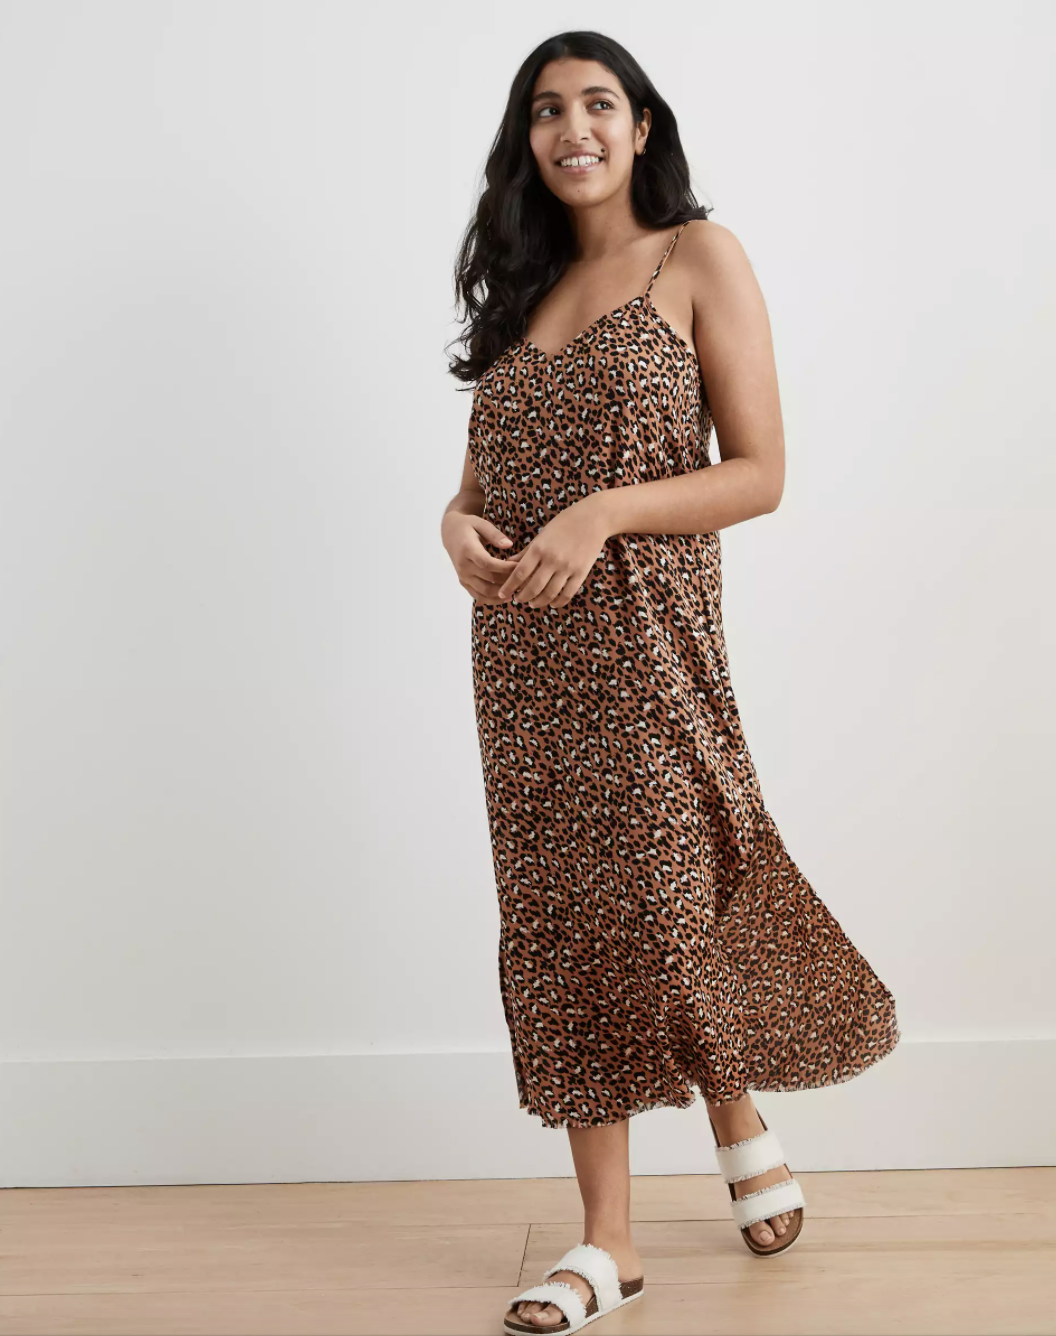 A model wearing the leopard print slip dress with tan slides 